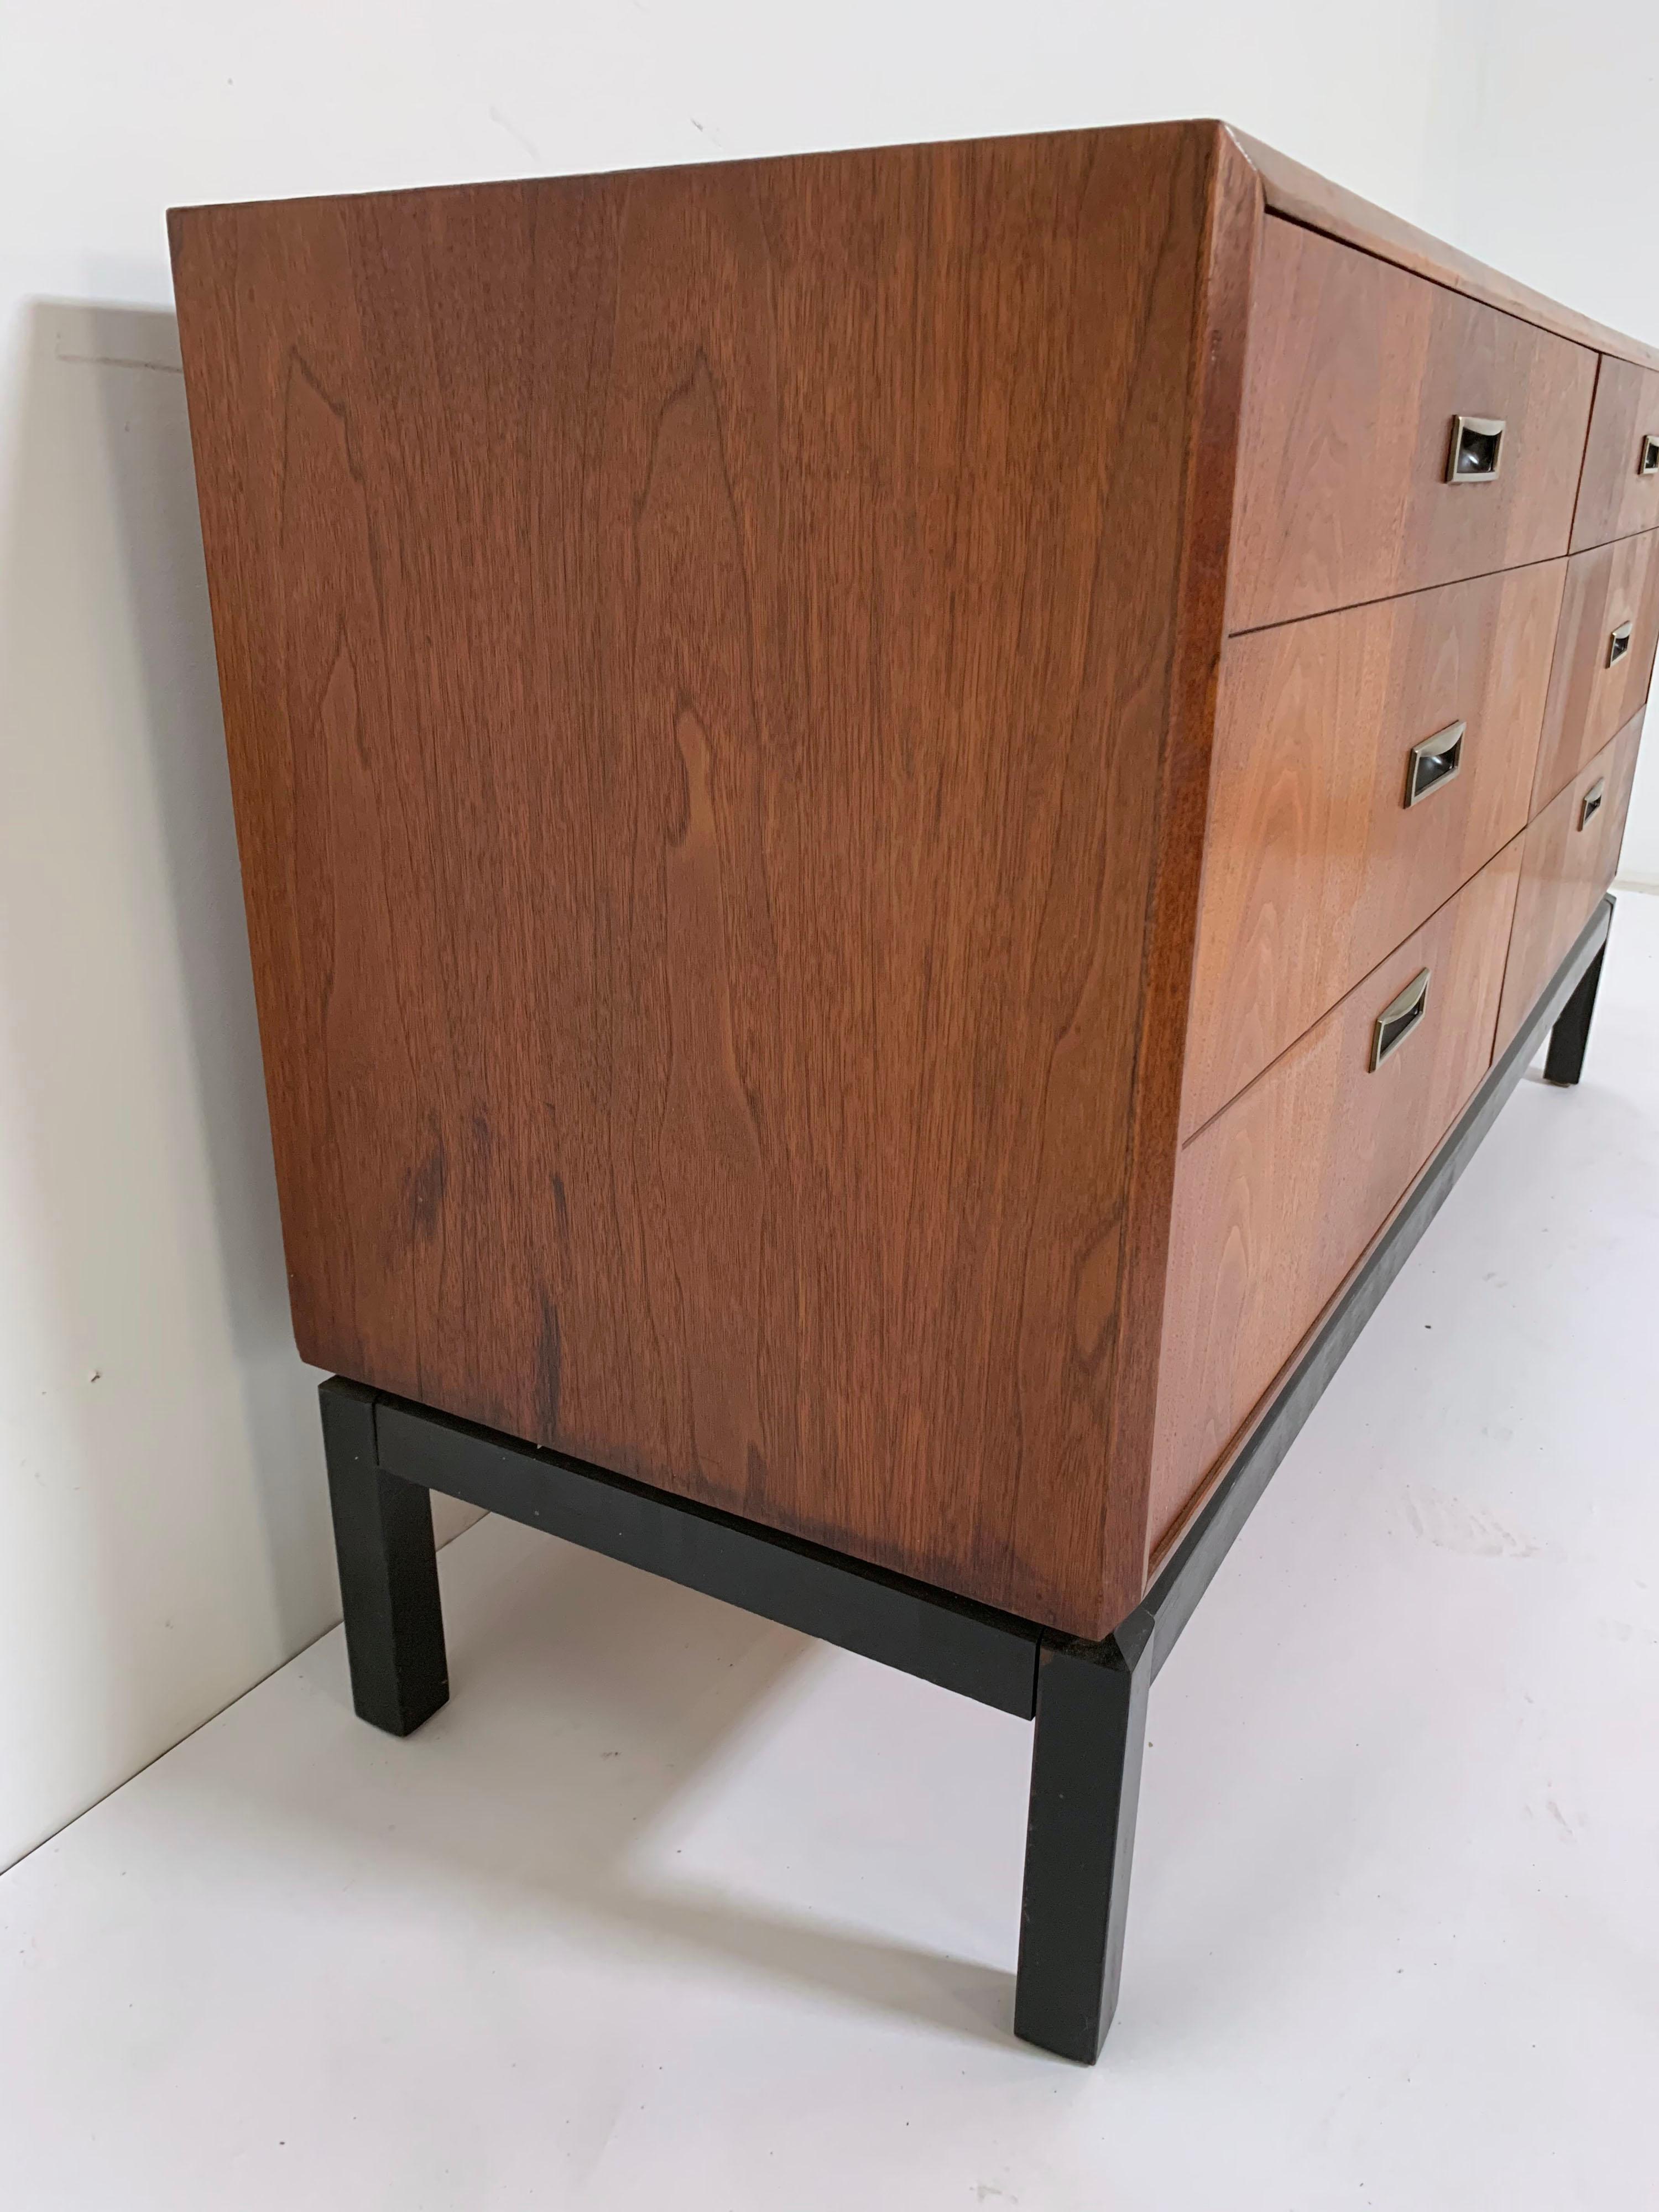 Midcentury Six-Drawer Walnut Dresser by Jack Cartwright for Founders circa 1970s 6